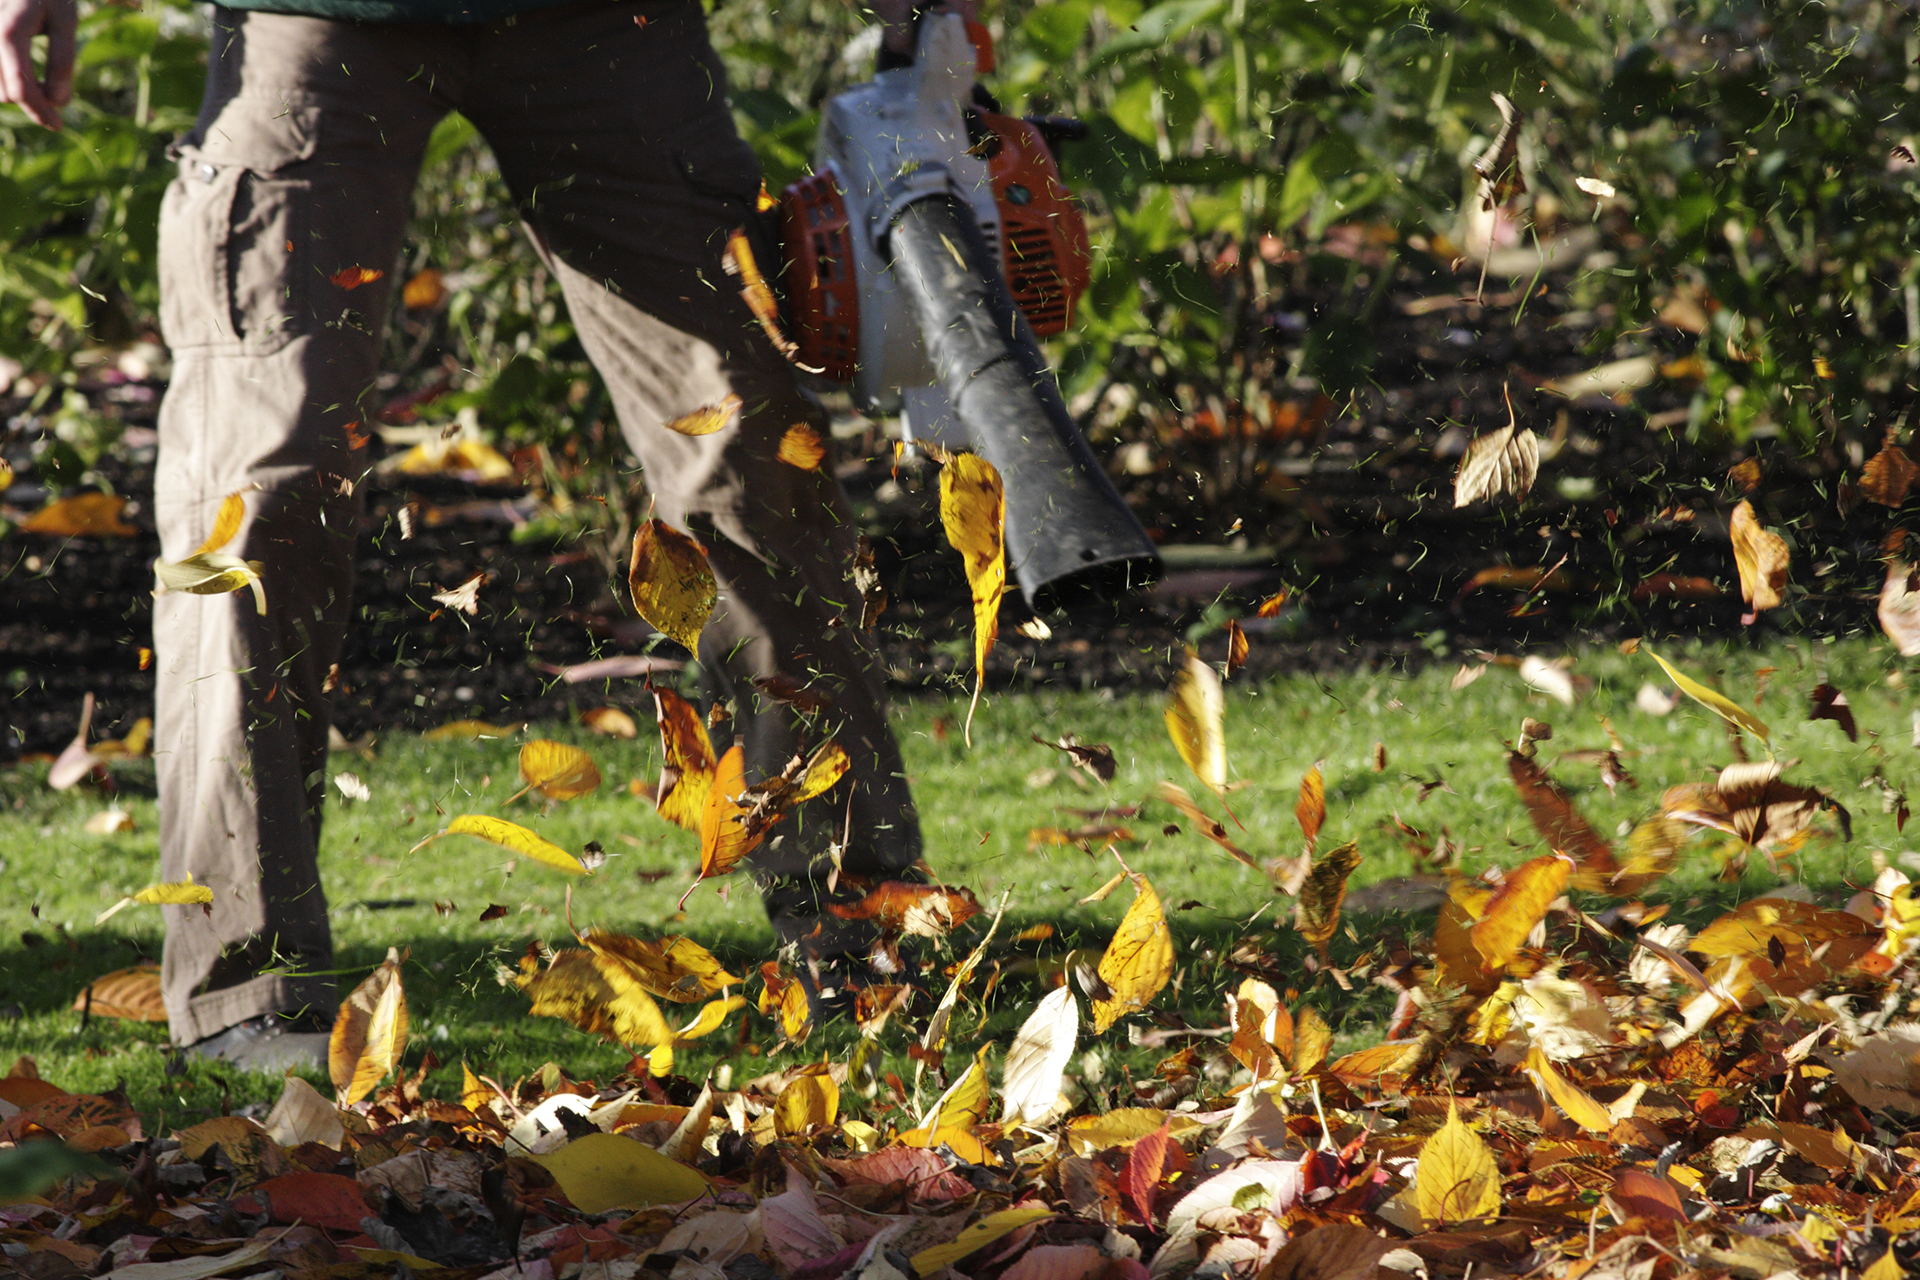 Artificial wind leaf blower blows autumn leaves